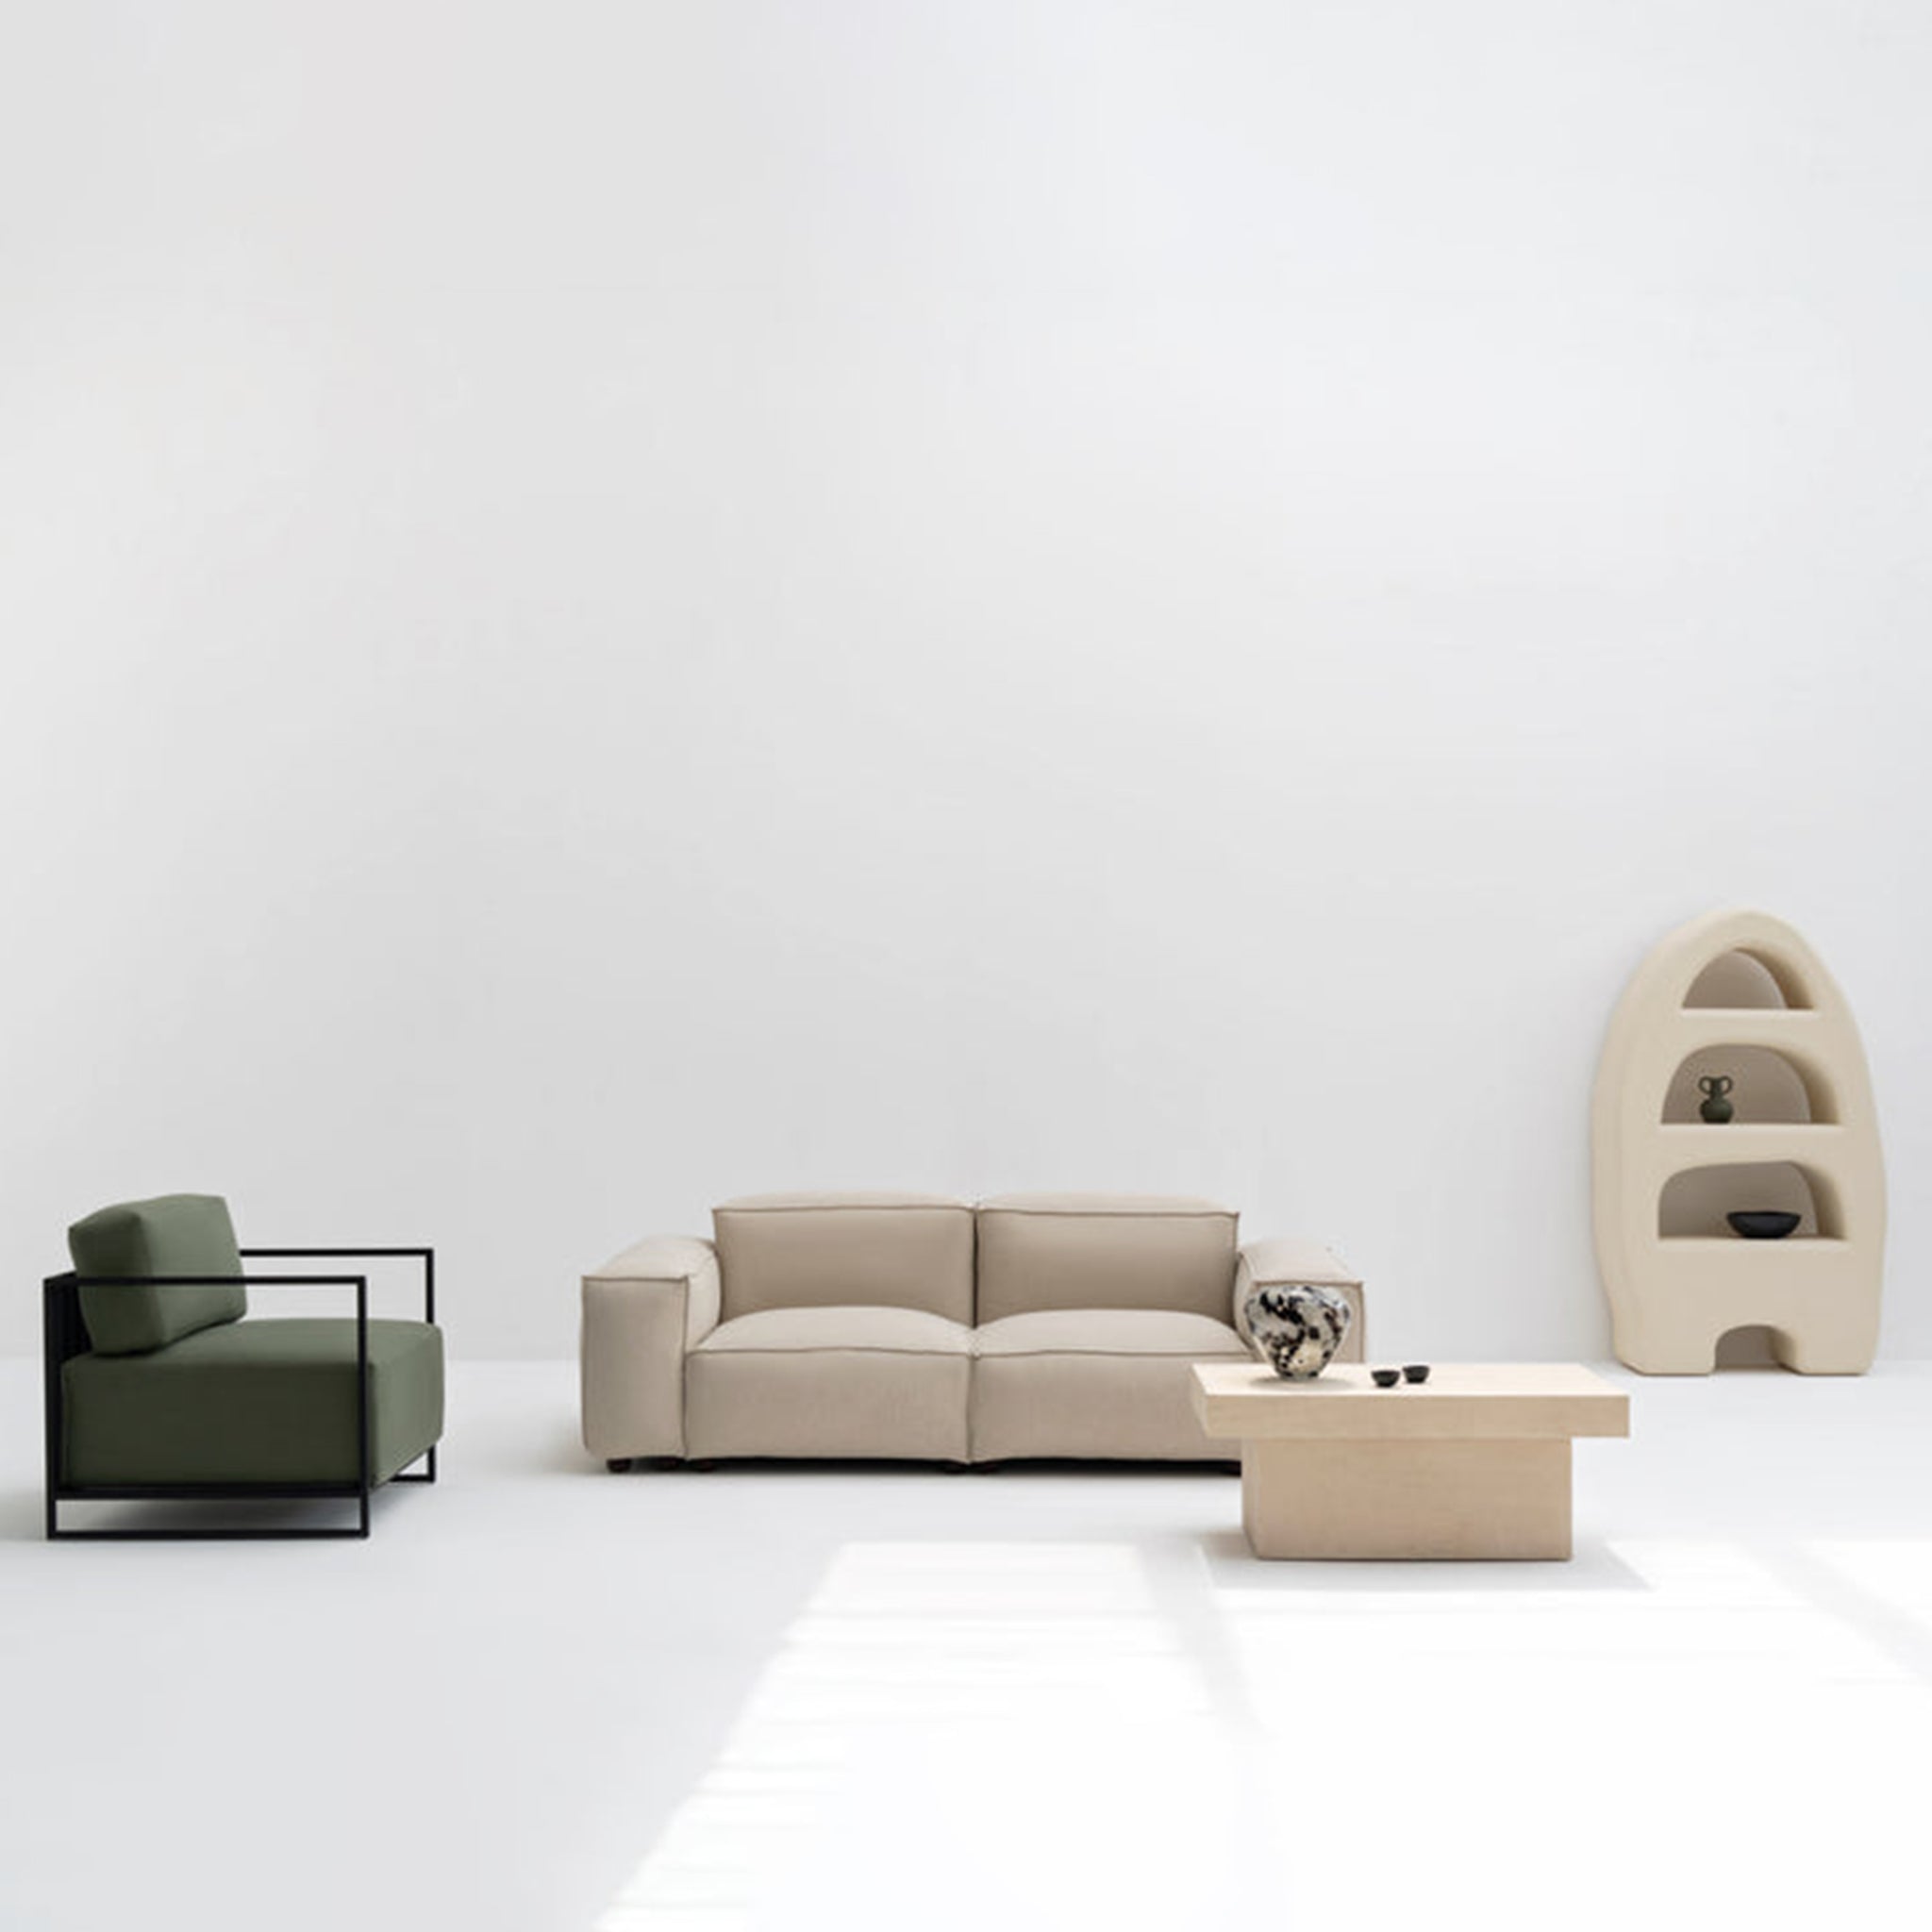 Elegant beige couch with clean lines and modern design in a minimalist setting